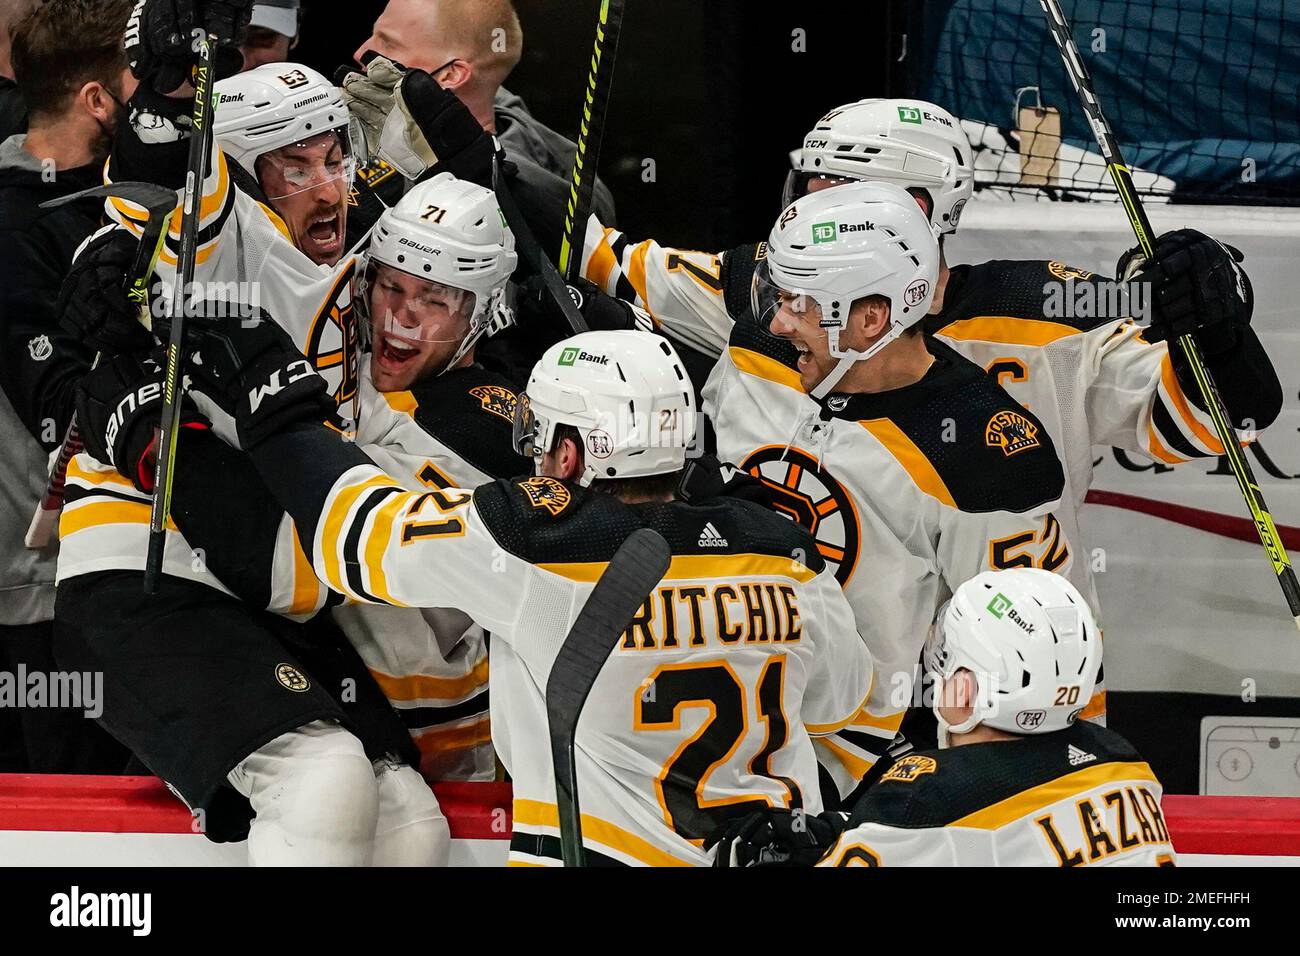 Boston Bruins Win Stanley Cup by Playing Like Canadians - The Atlantic